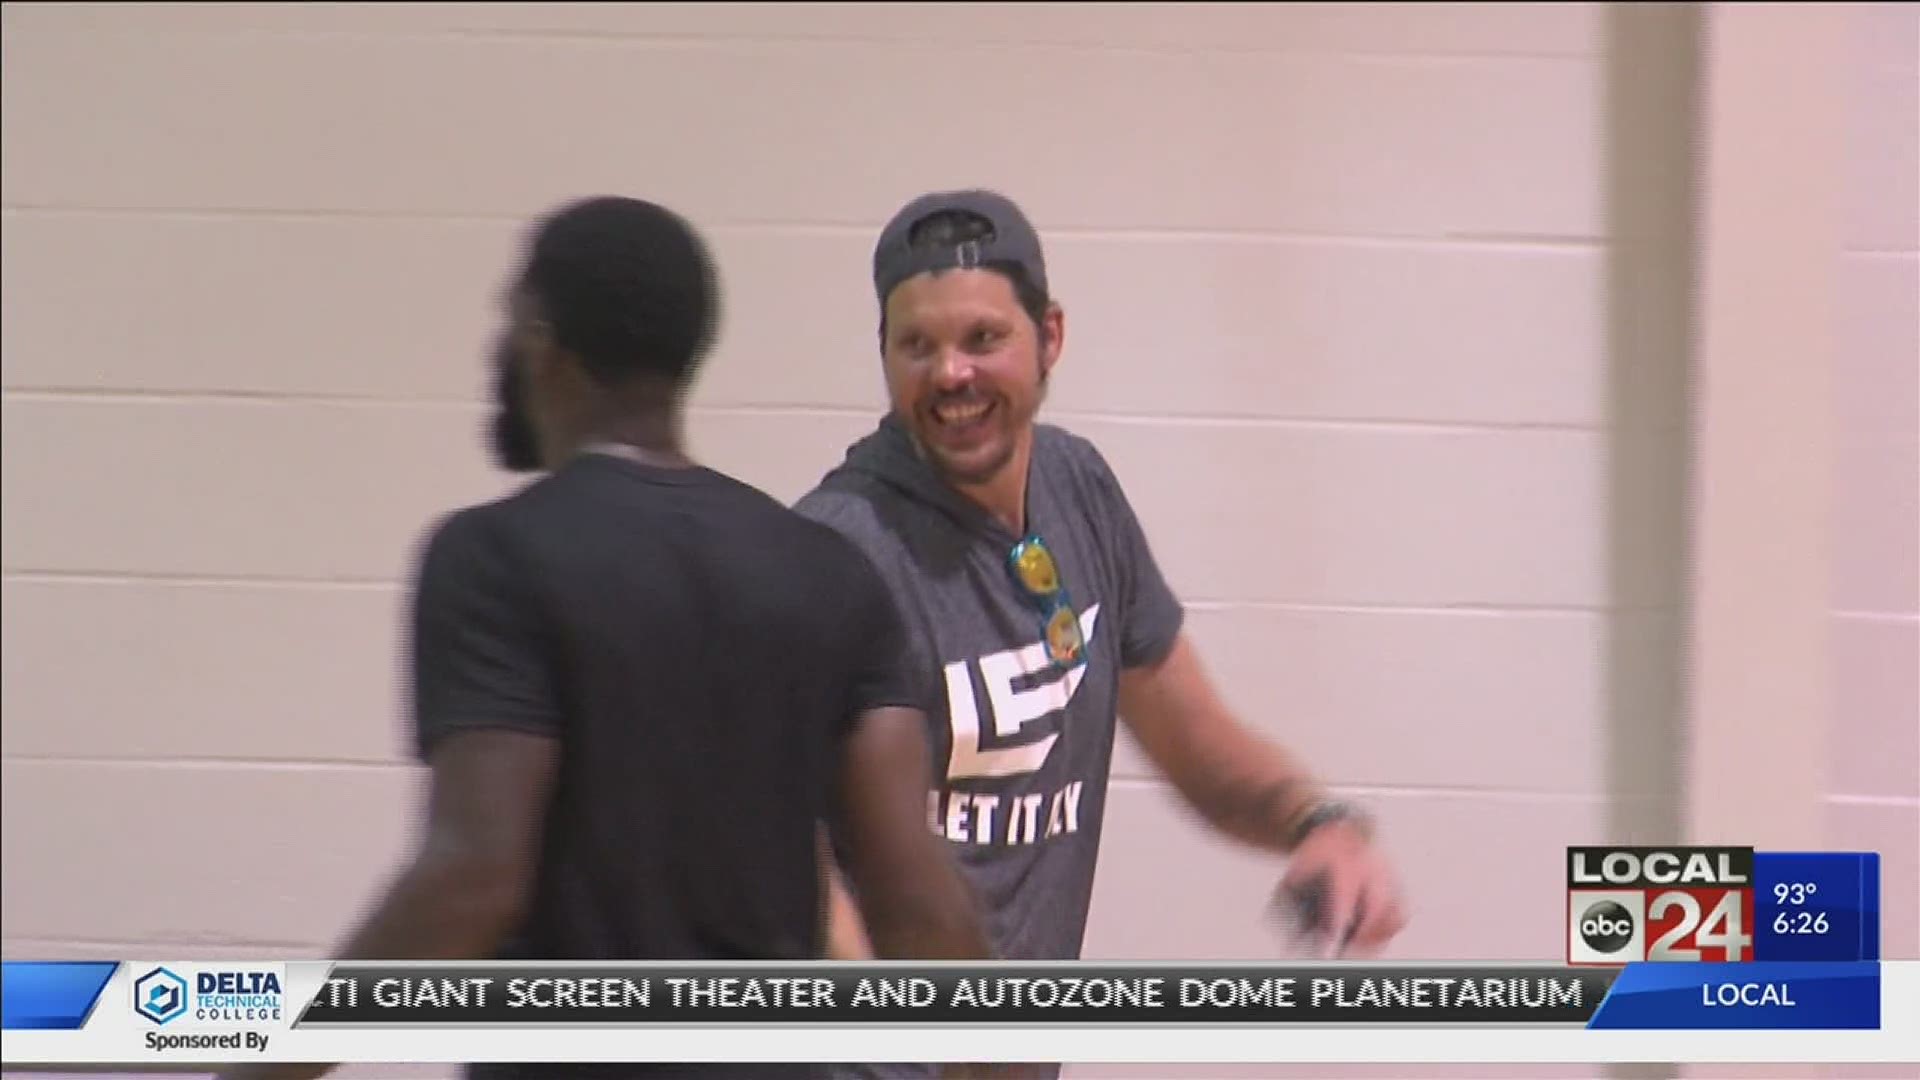 Mike Miller, a former NBA star and assistant coach at the University of Memphis, takes over for the retiring Charlie Leonard at Houston High School